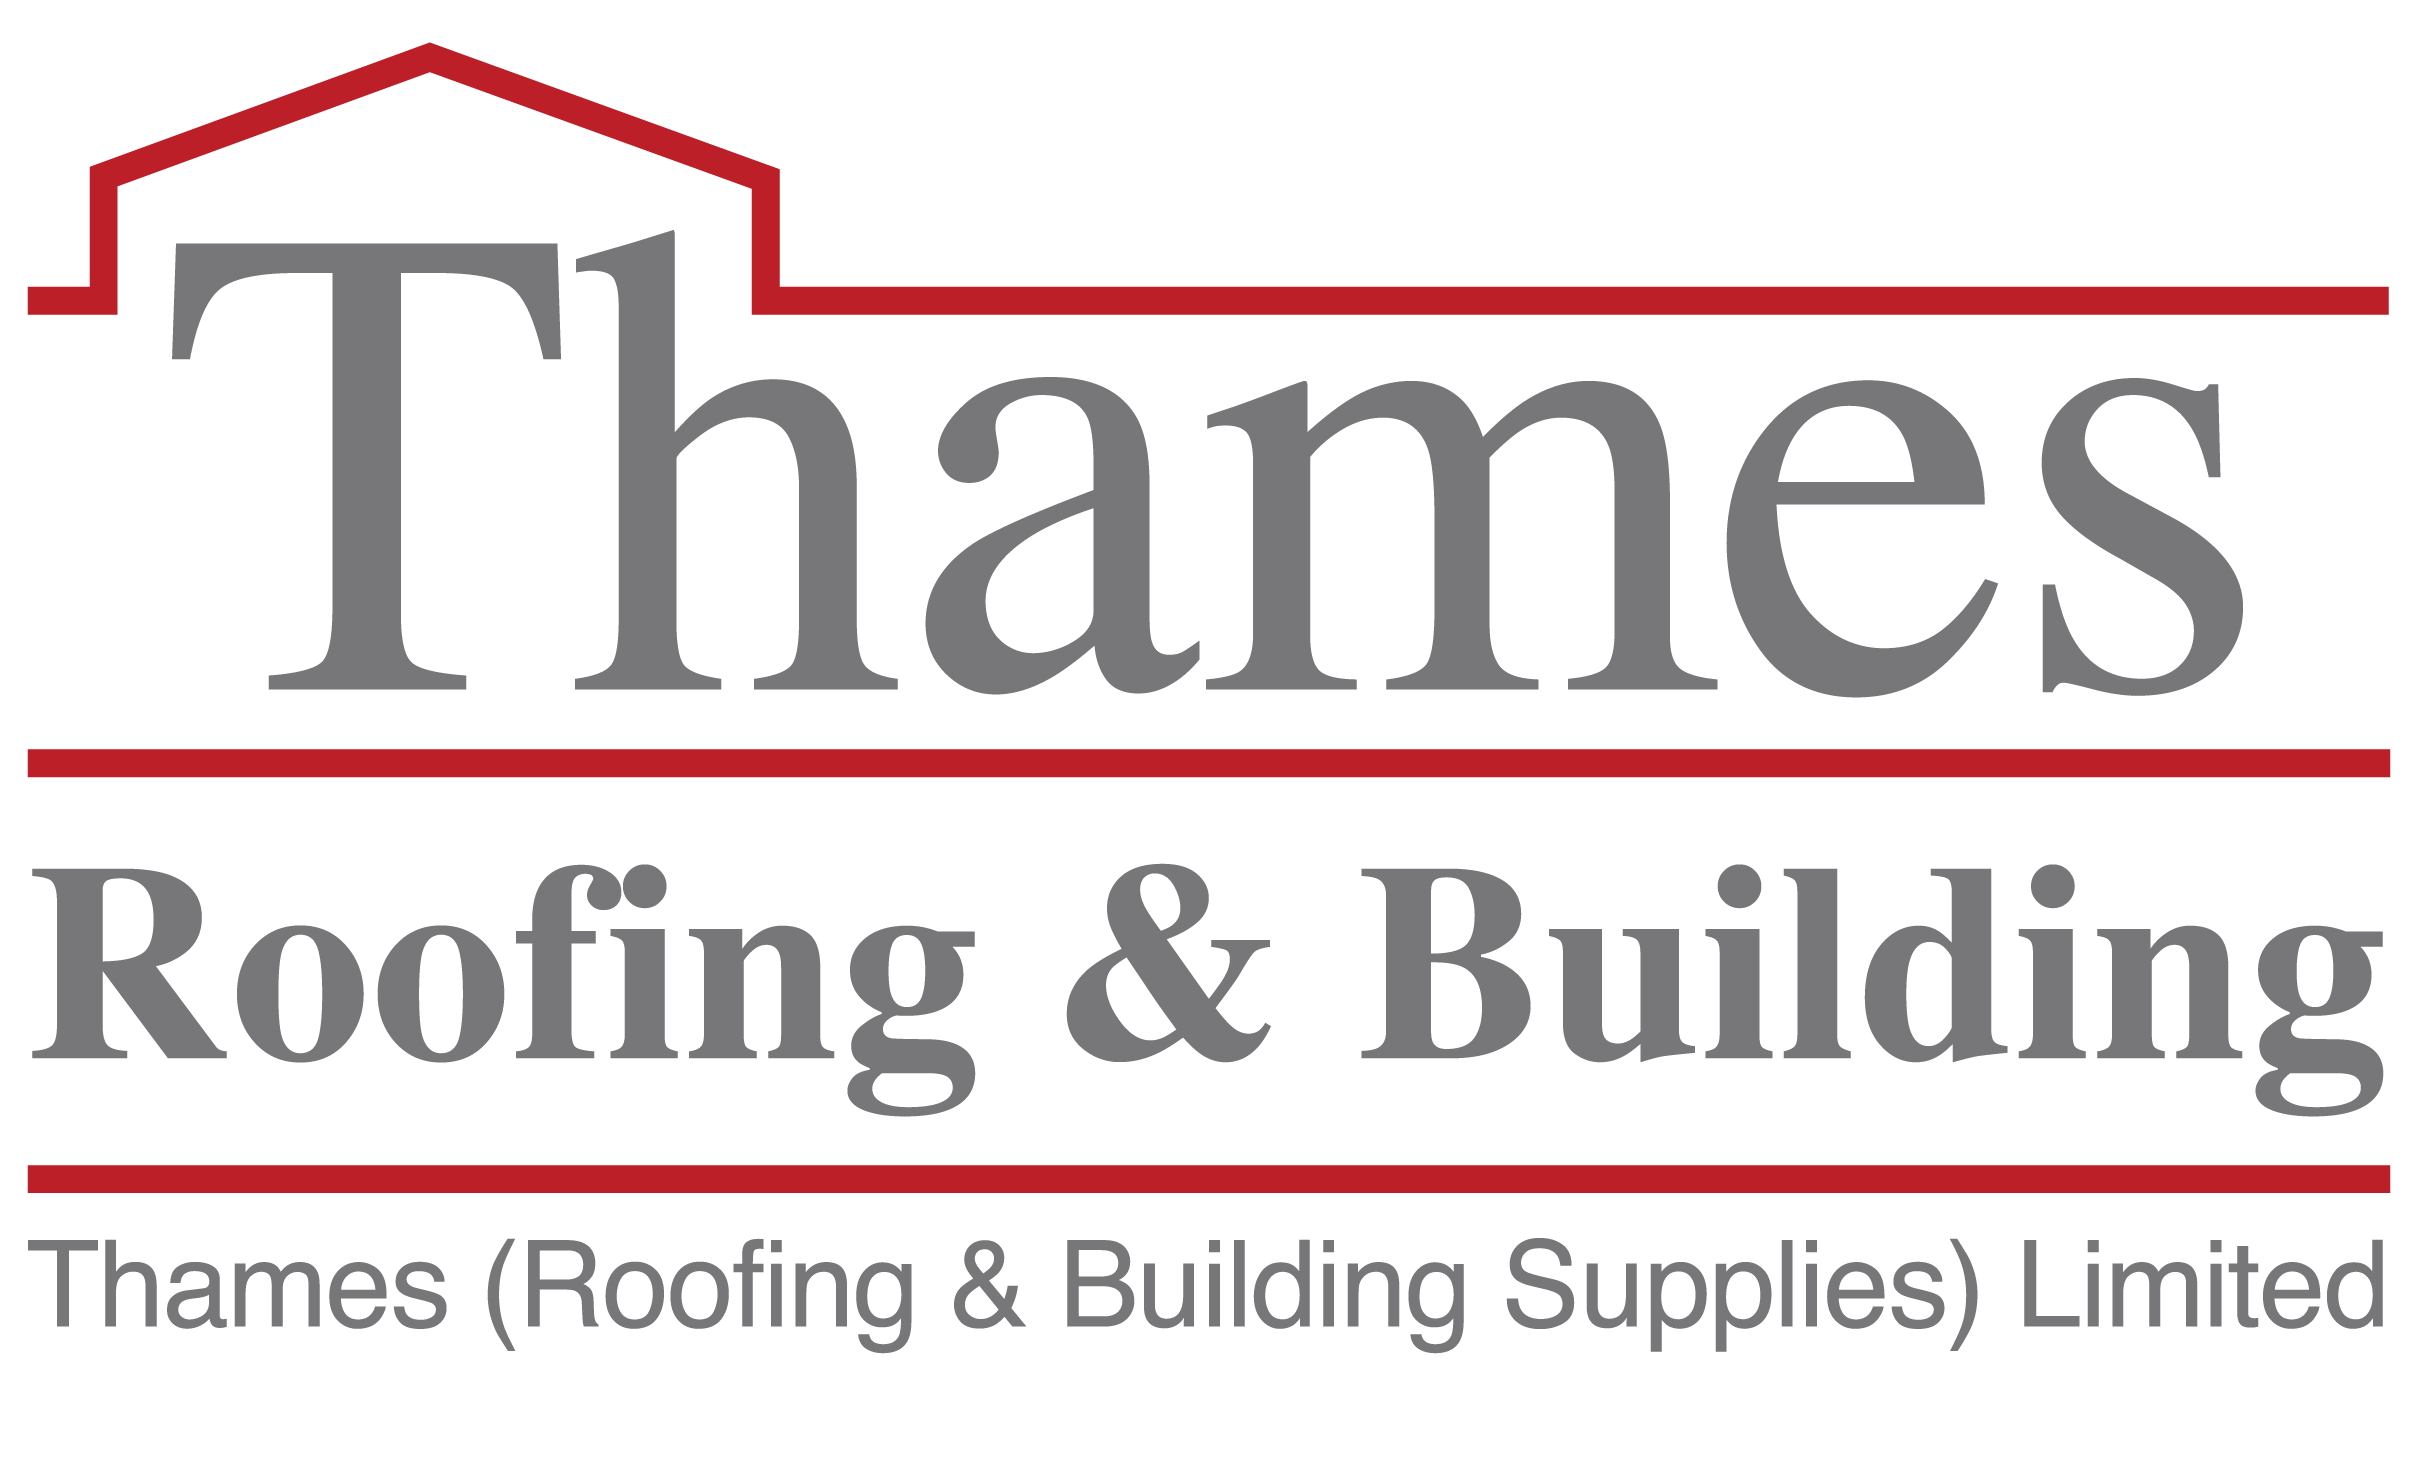 Thames Roofing & Building Supplies Ltd.